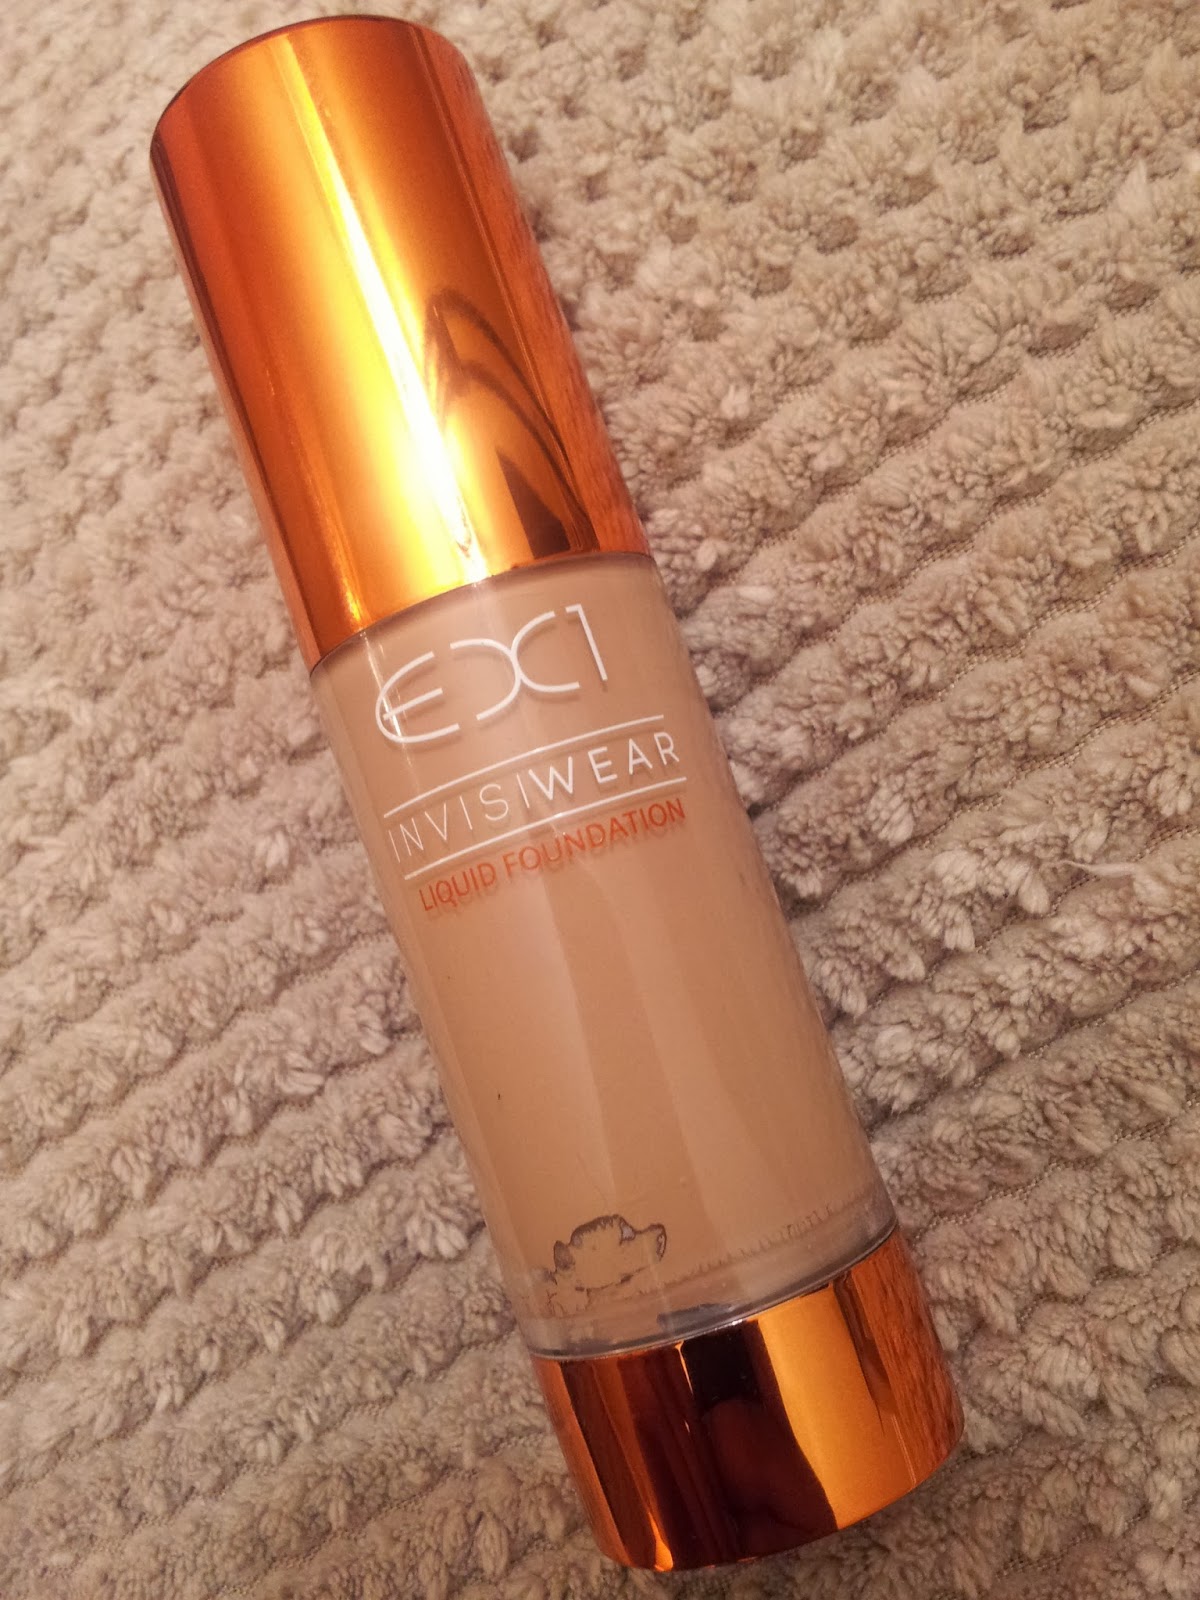 Ex1 Invisiwear Liquid Foundation Amp Ex1 Delete Concealer Review And Swatches